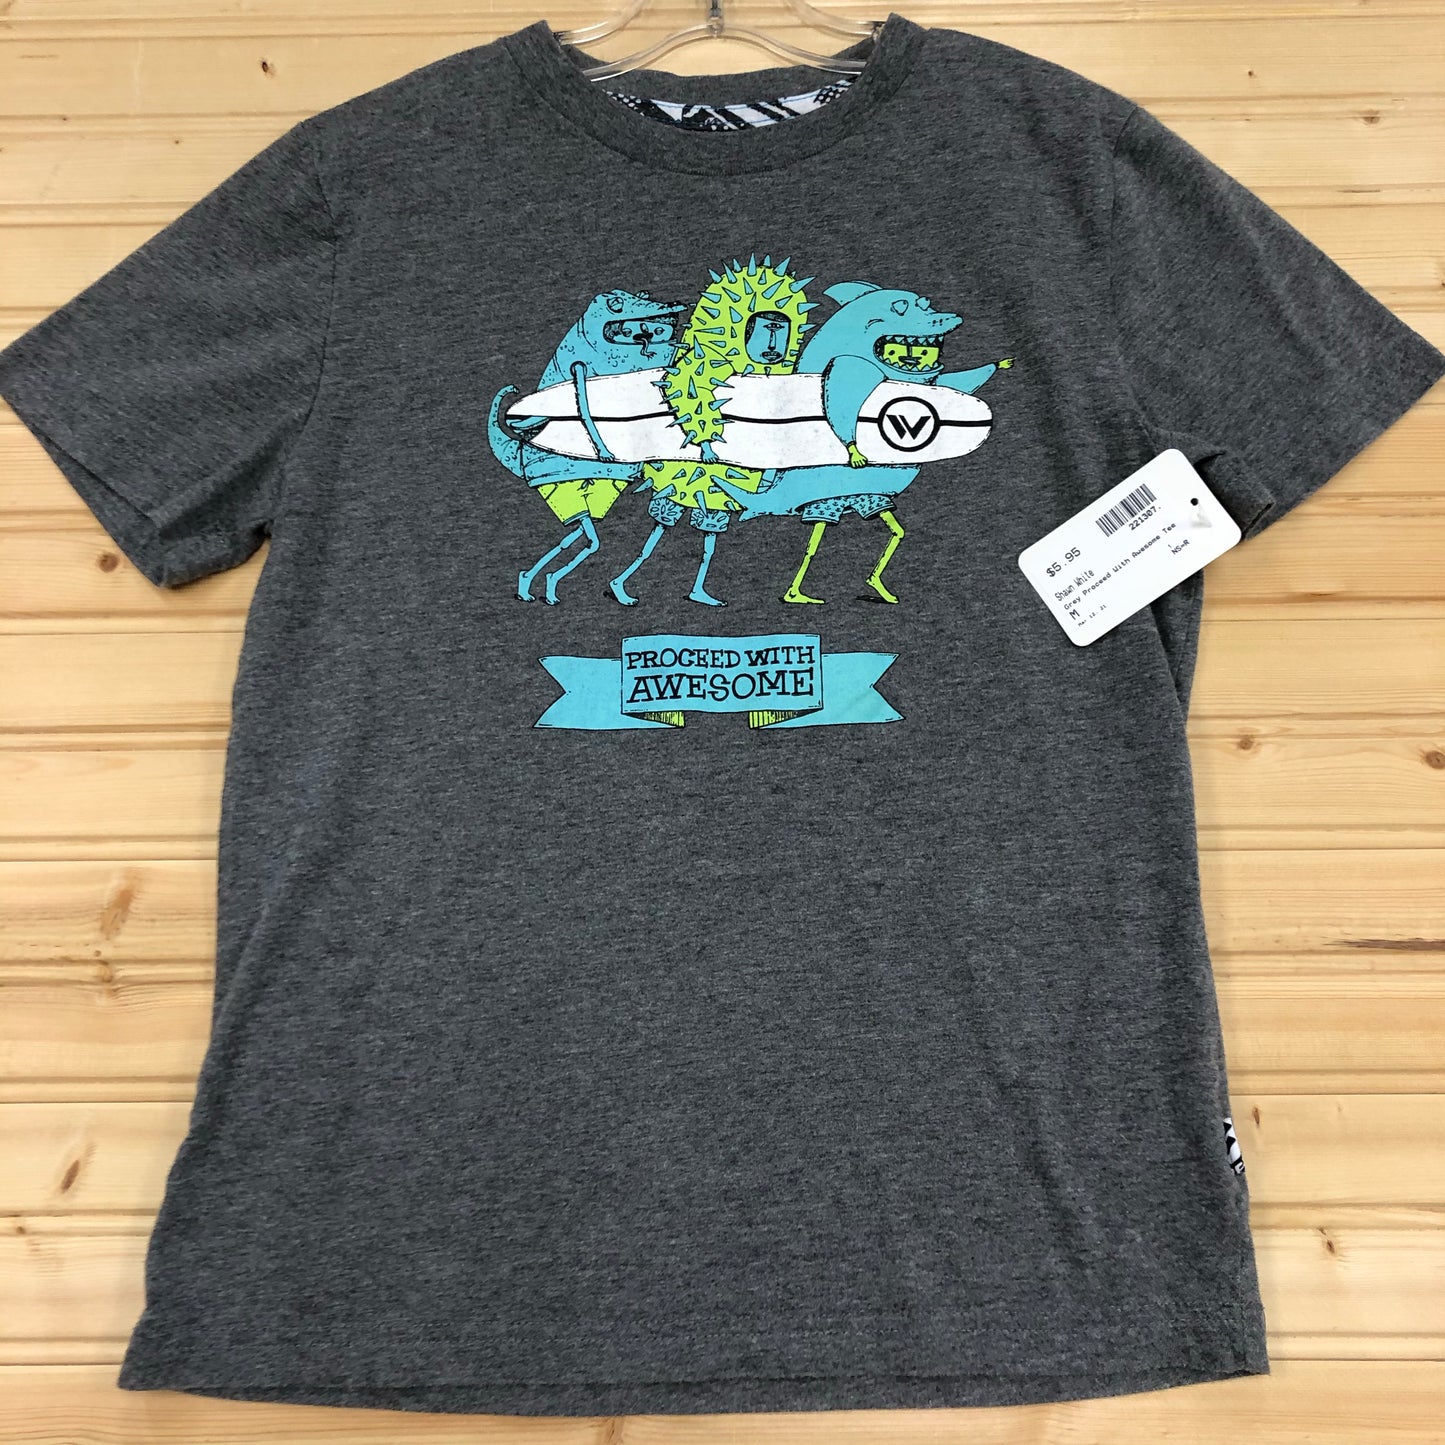 Grey Proceed With Awesome Tee